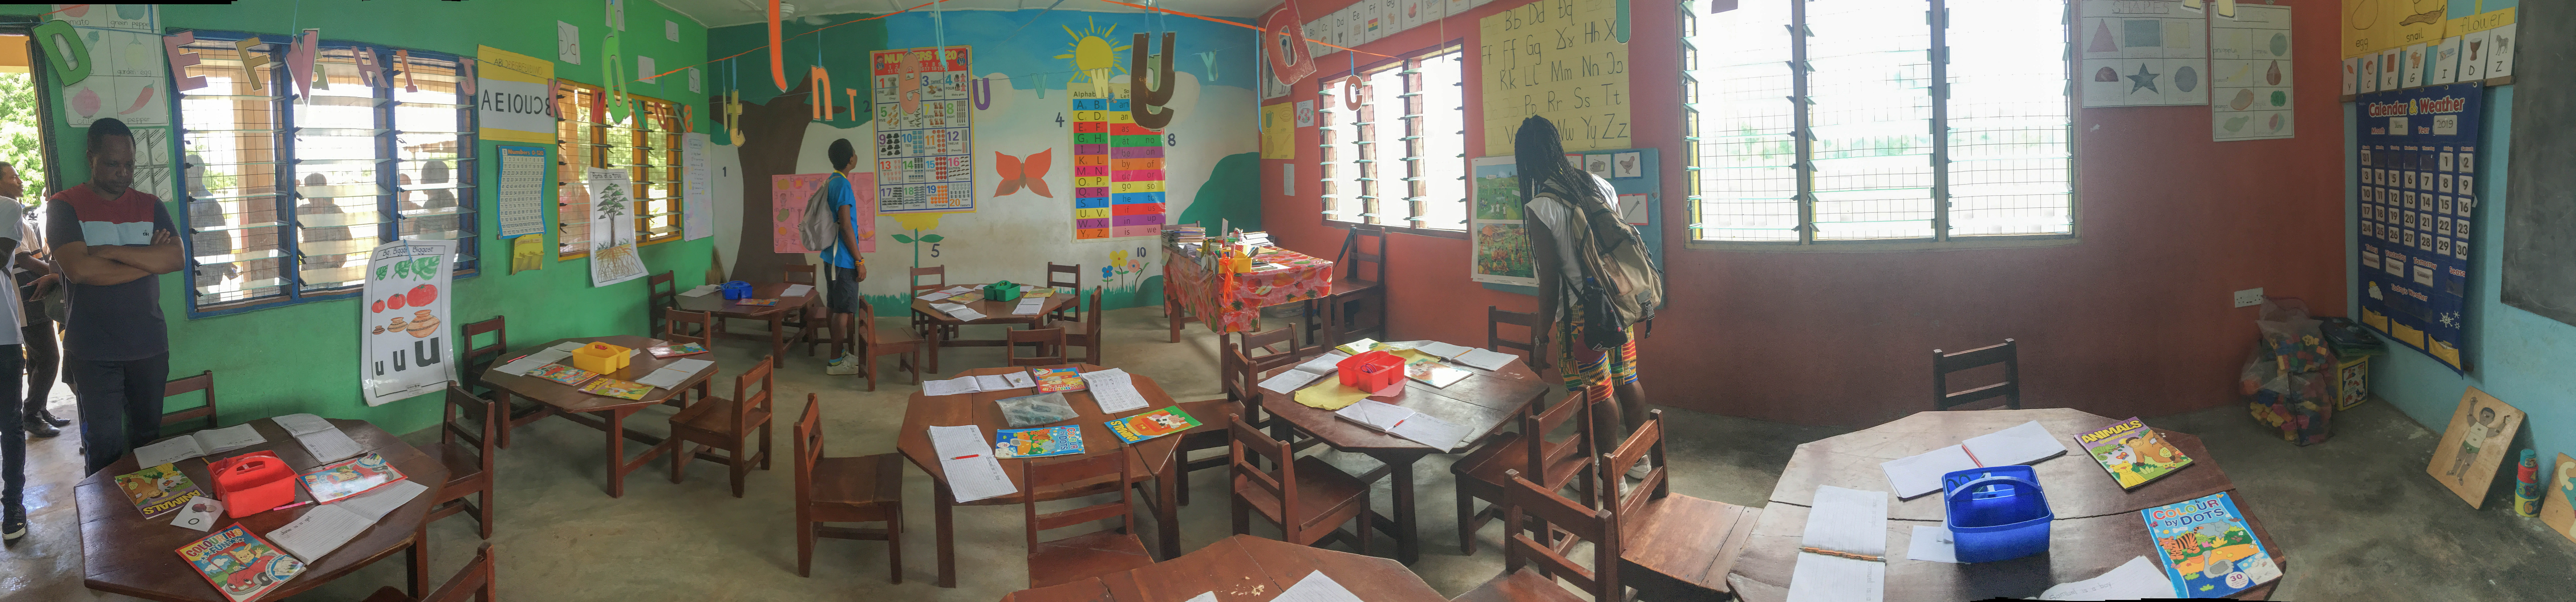 One of two kindergarten classrooms at the school. 